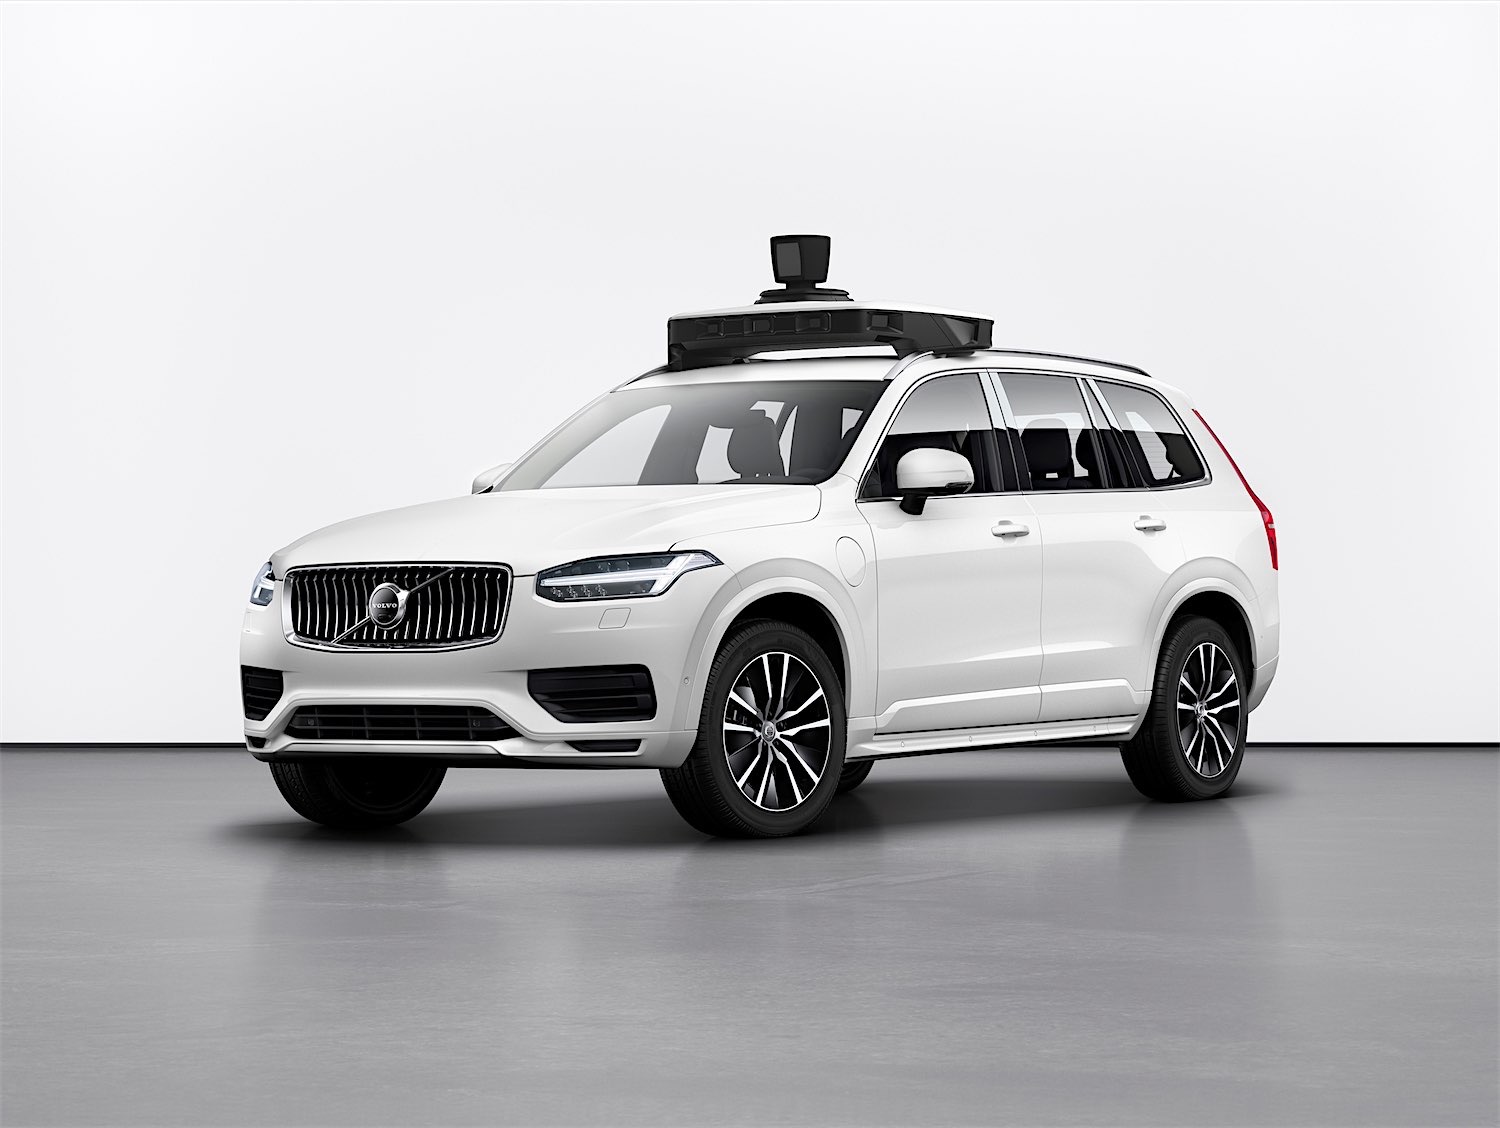 254701_volvo_cars_and_uber_present_production_vehicle_ready_for_self-driving-resized.jpg